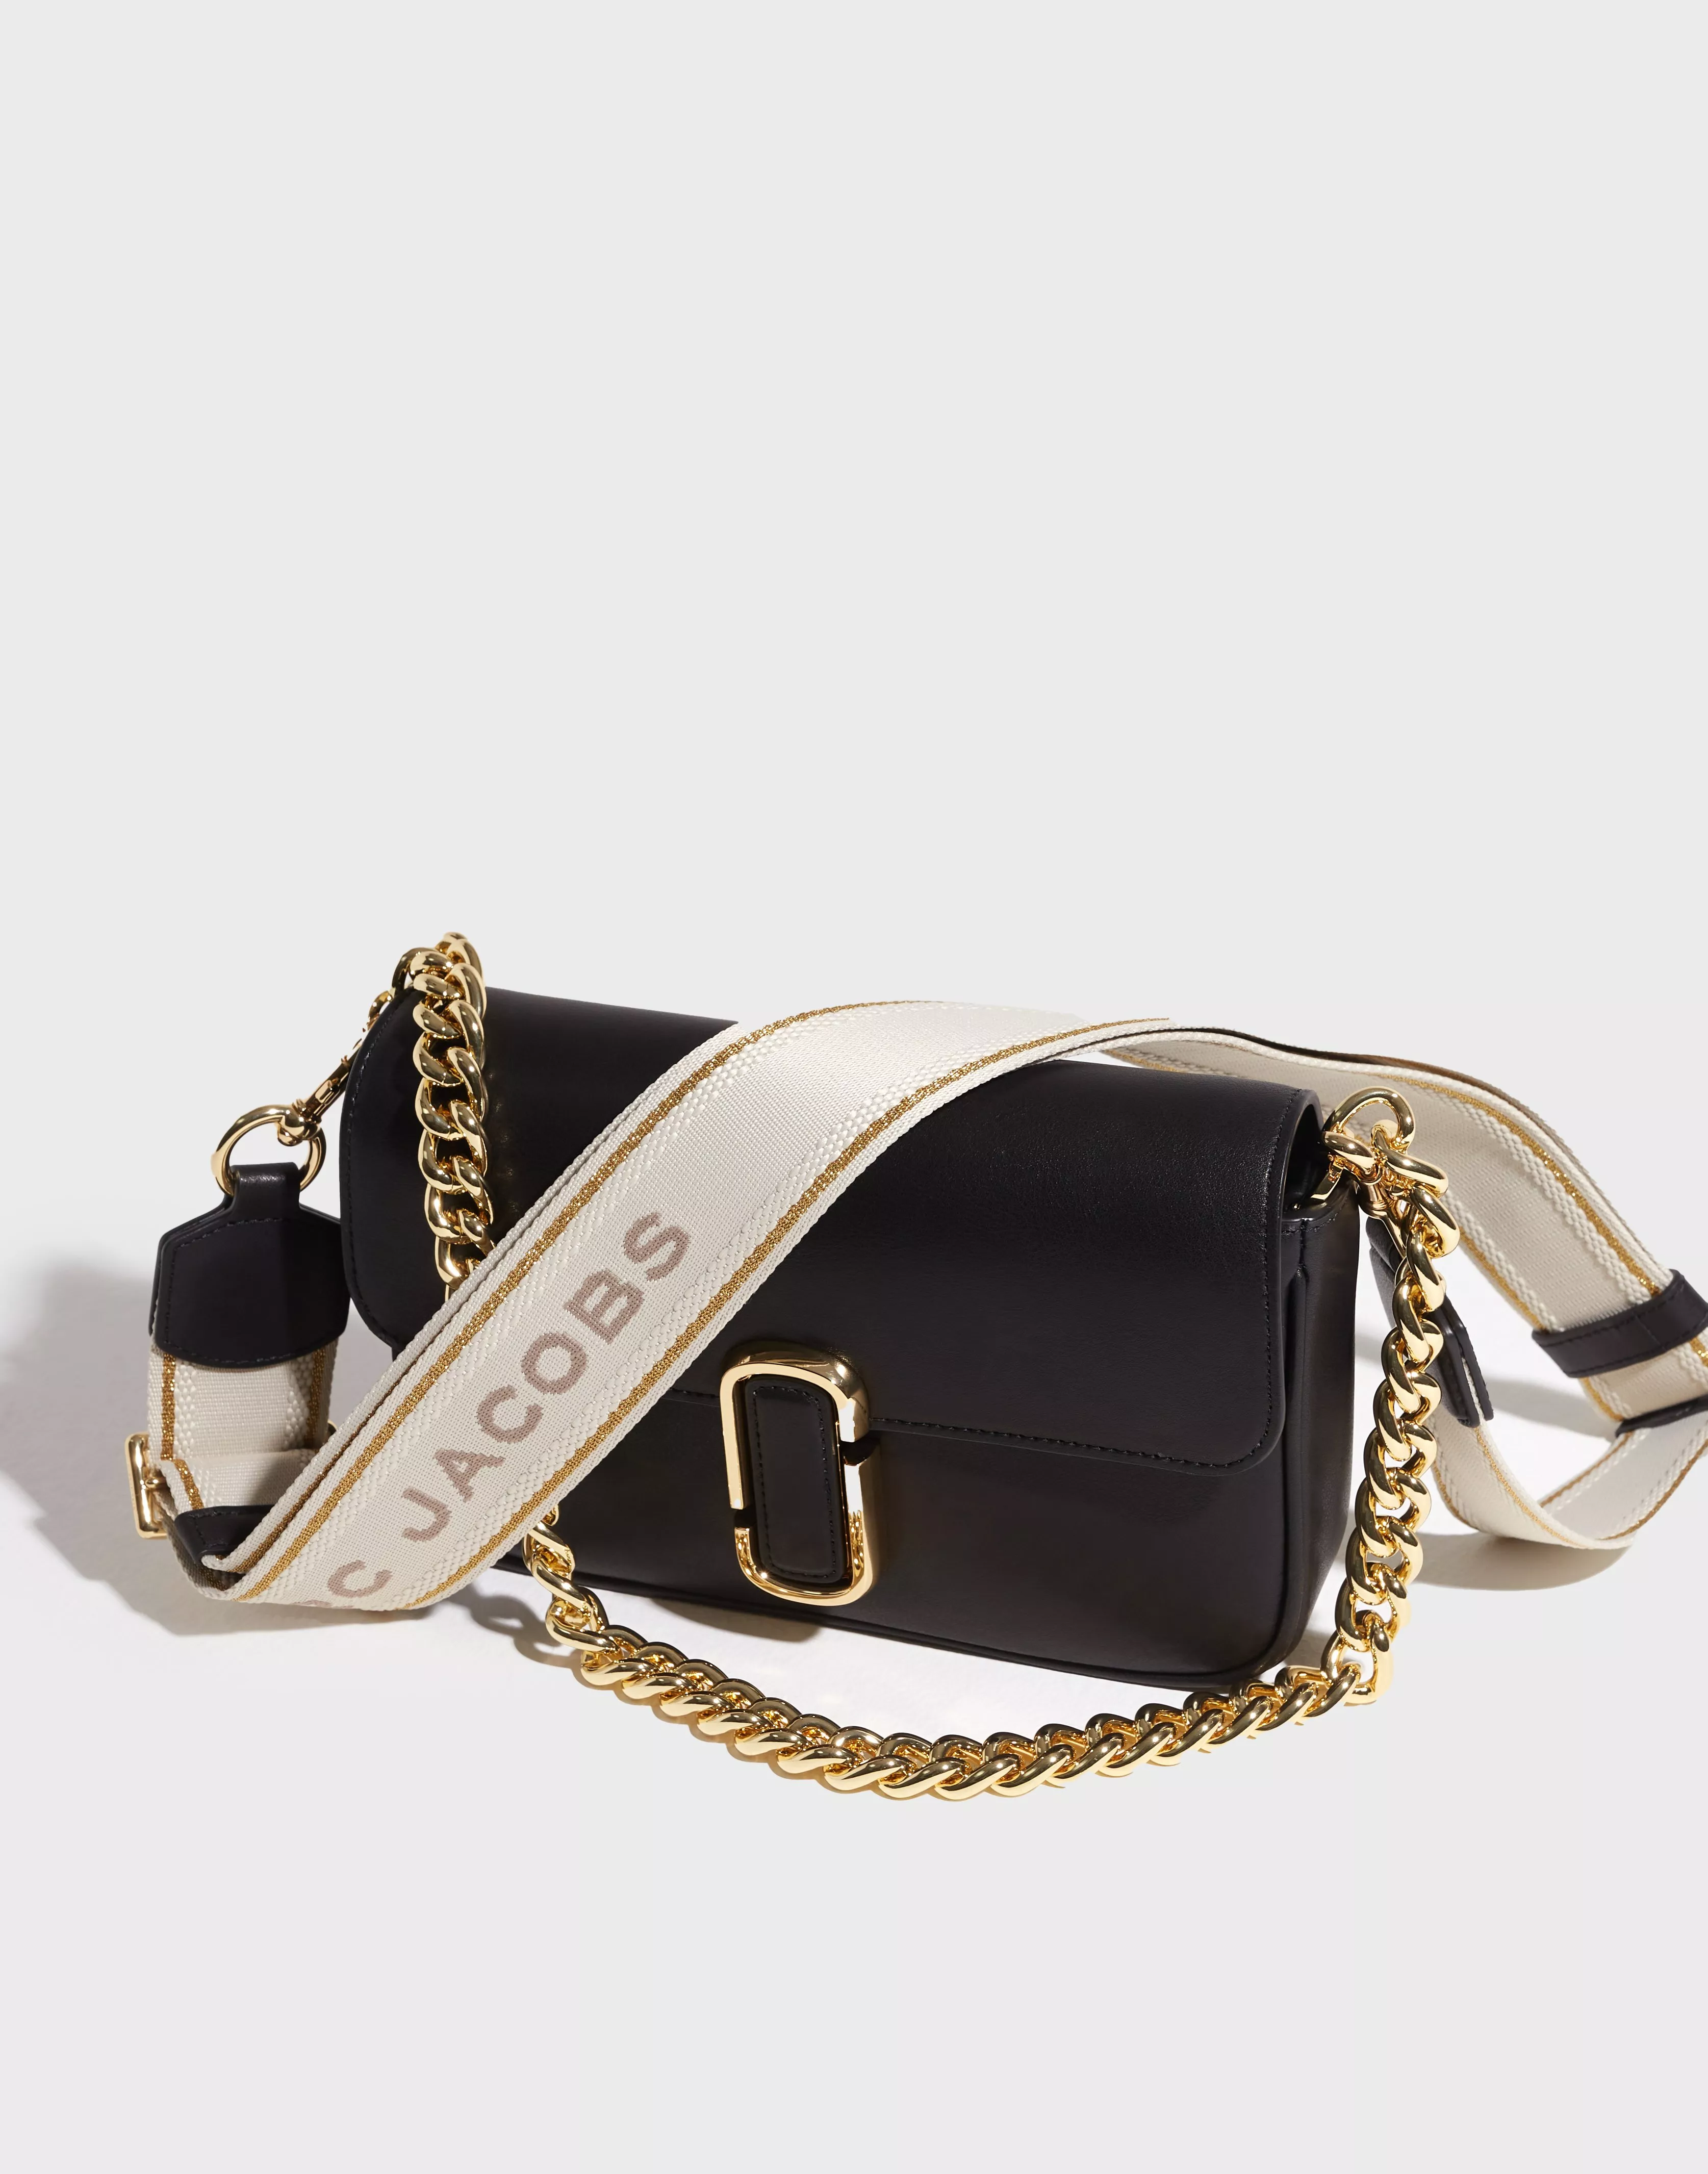 Marc Jacobs Crossbody Bag Review 